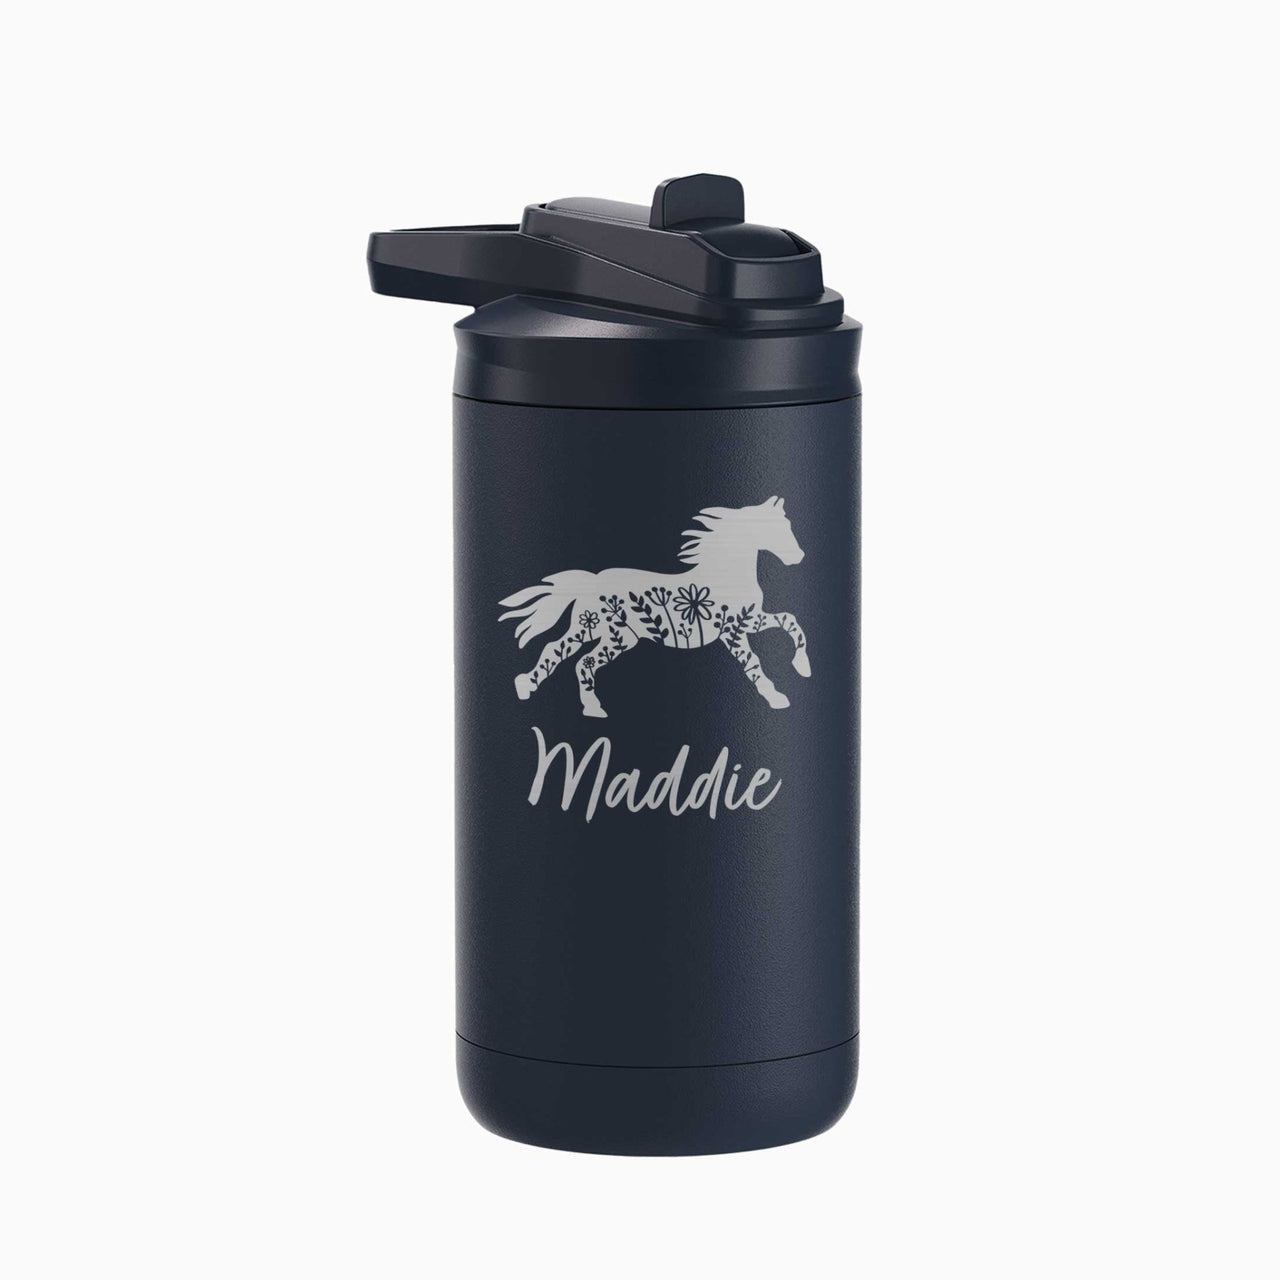 Copy of Personalized Kids Water Bottle 12 oz - Horse Theme - Mod Peach